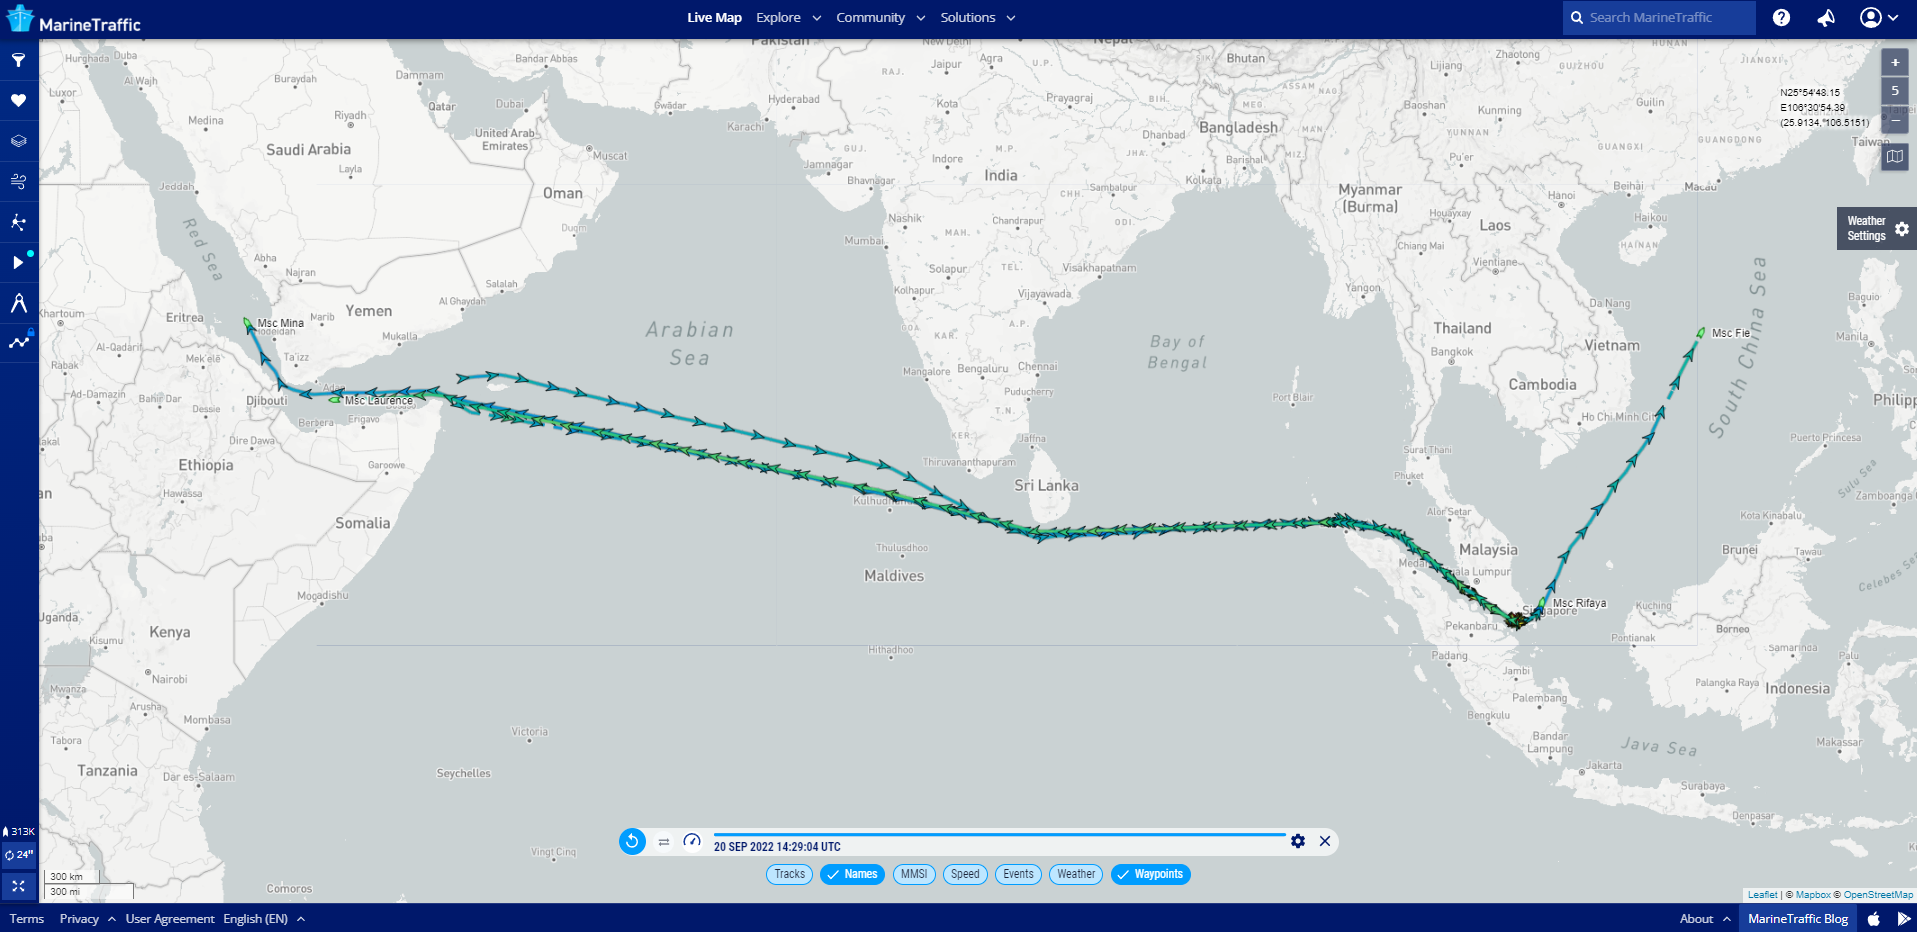 Four MSC vessels - Fie, Rifaya, Mina and Laurence - can be tracked passing the southern tip of Sri Lanka in September 